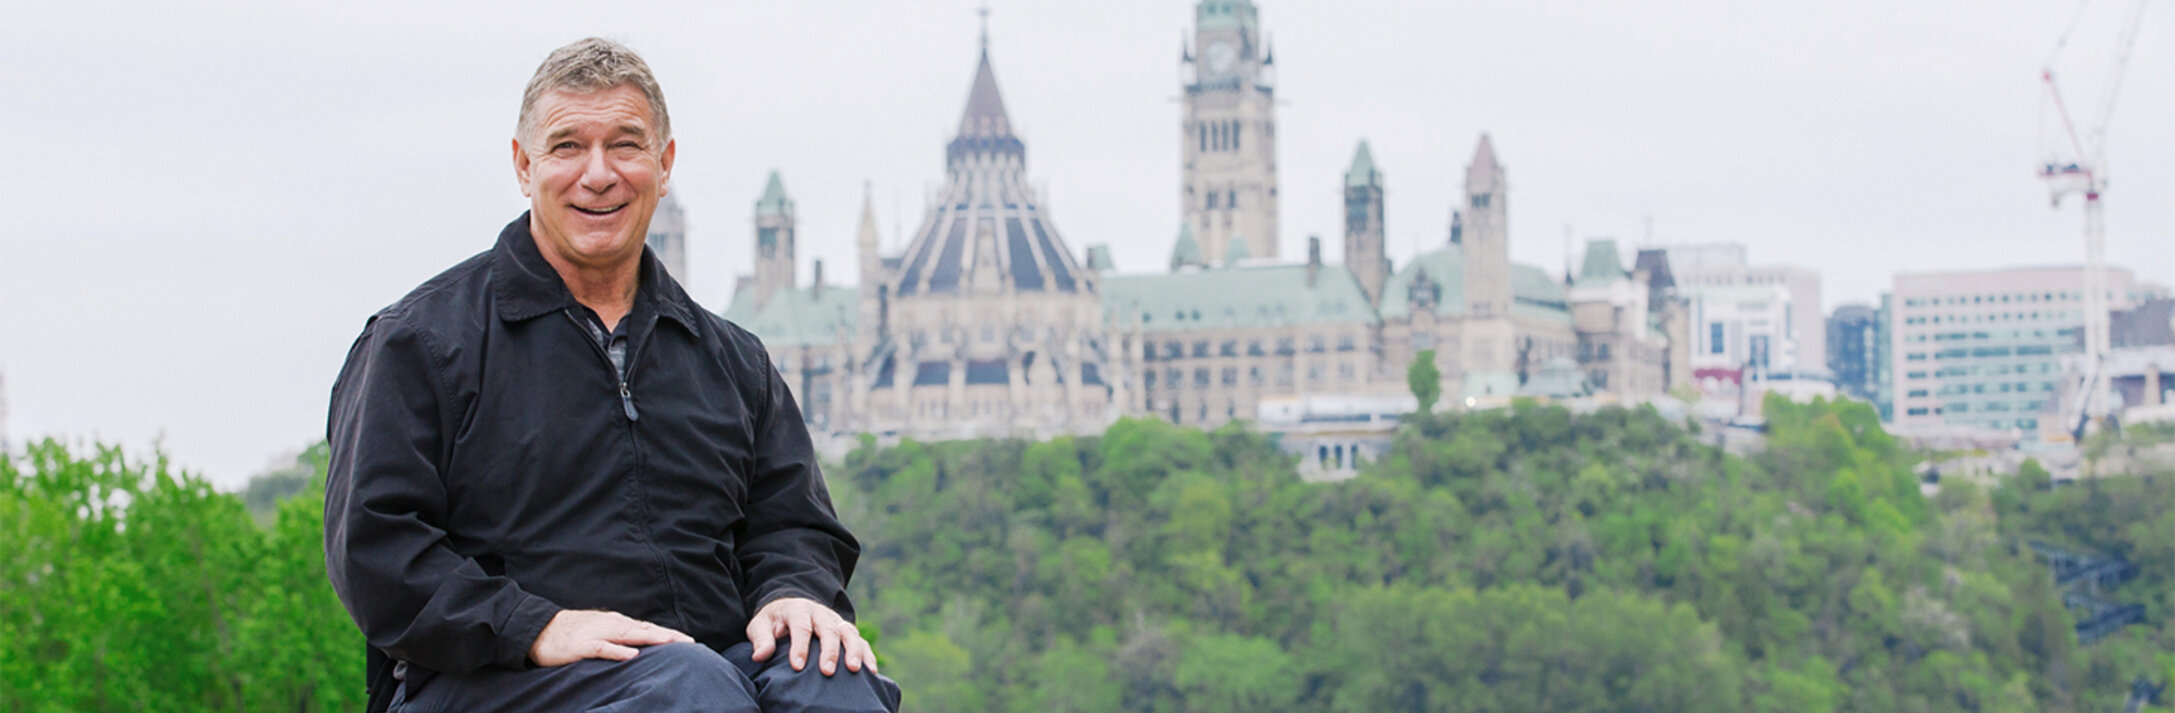 One-on-one with Rick Hansen
